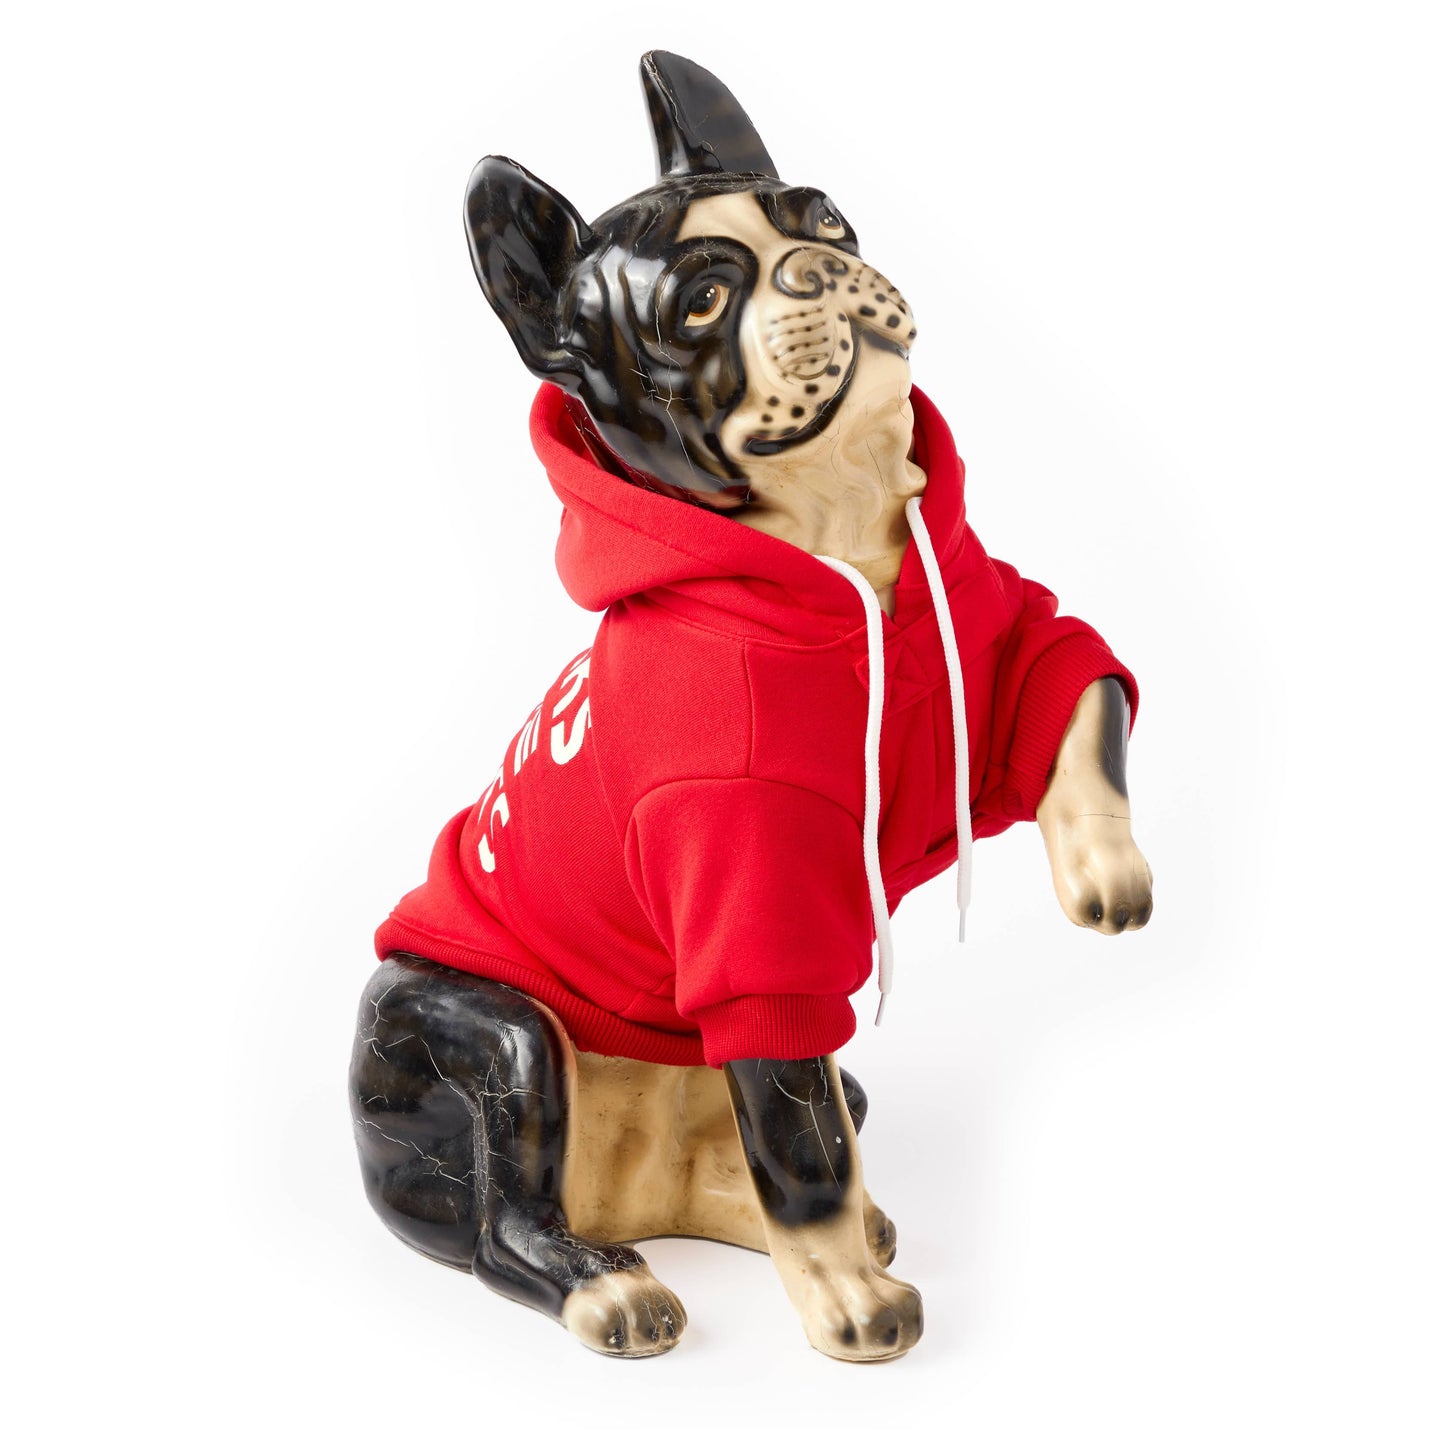 Works For Treats Dog Hoodie: S